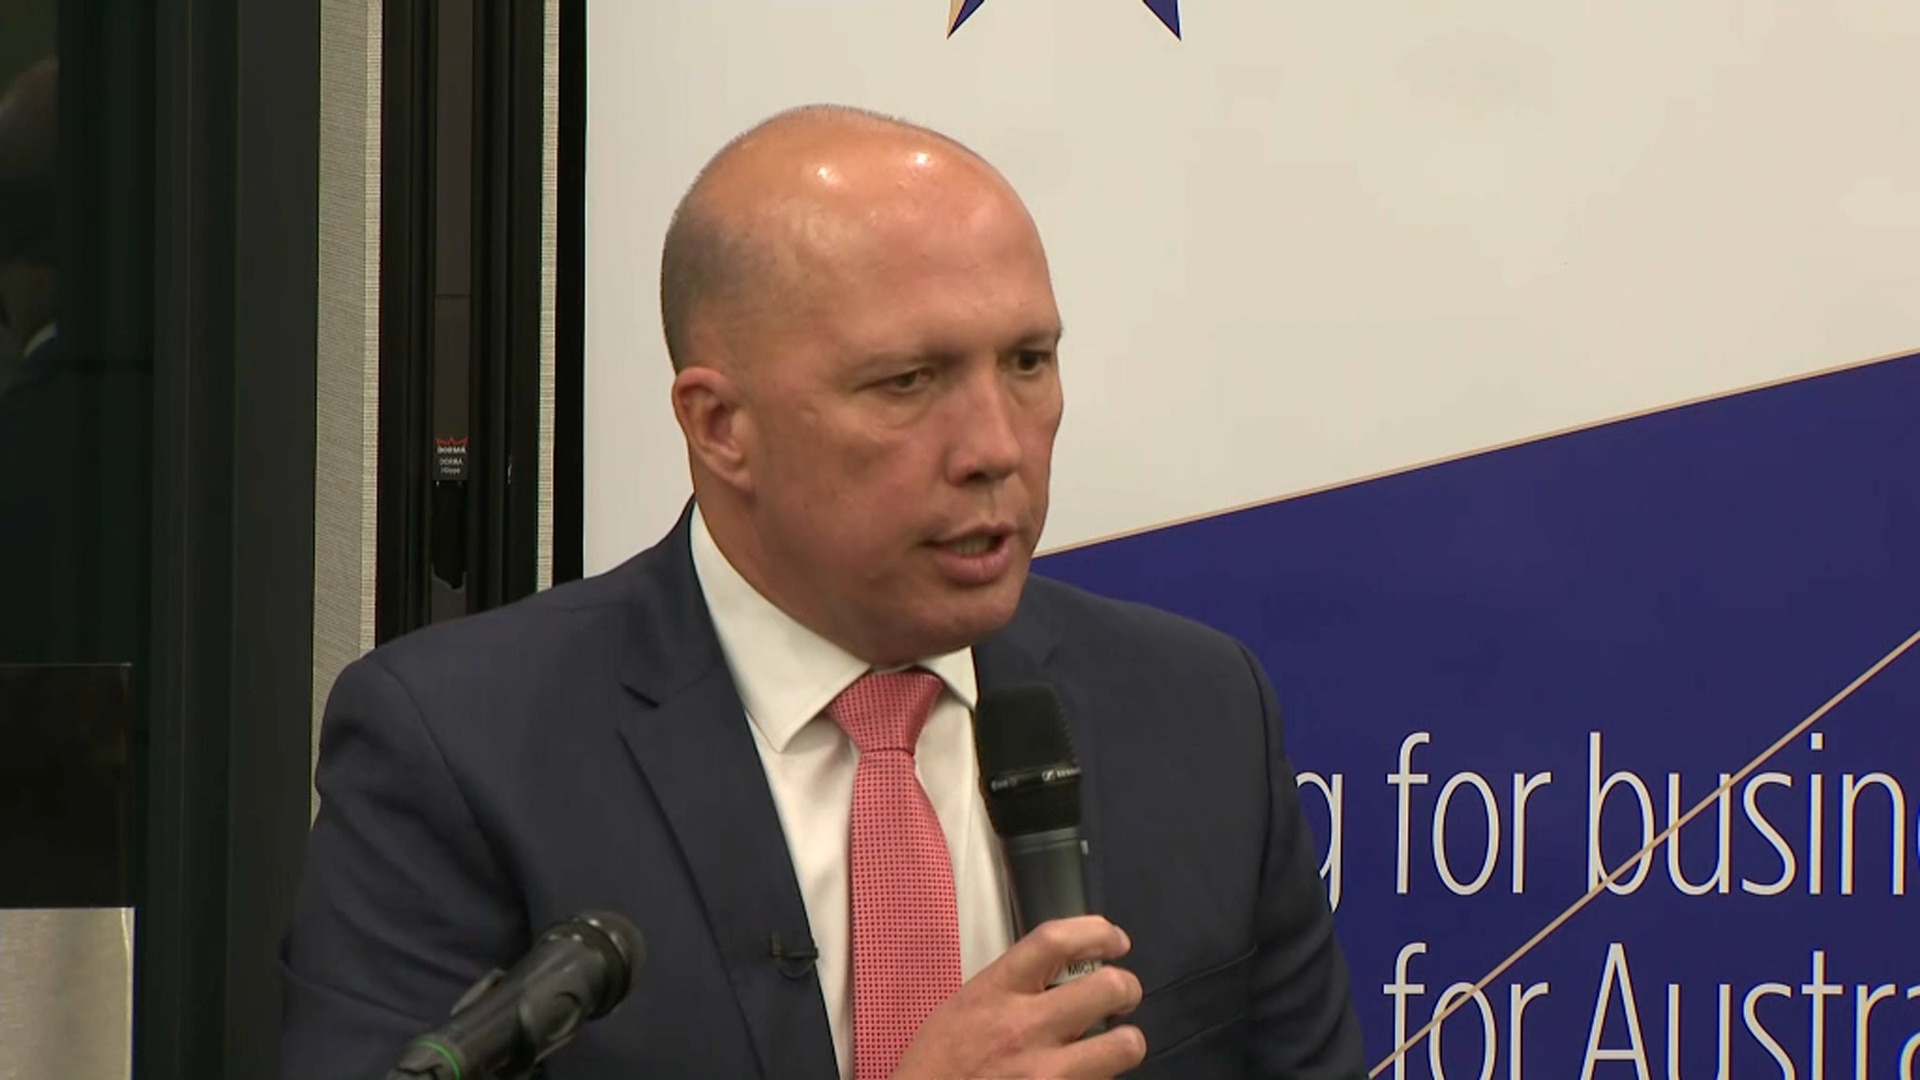 "Islamic terrorism is a primary security issue of our age": Peter Dutton.